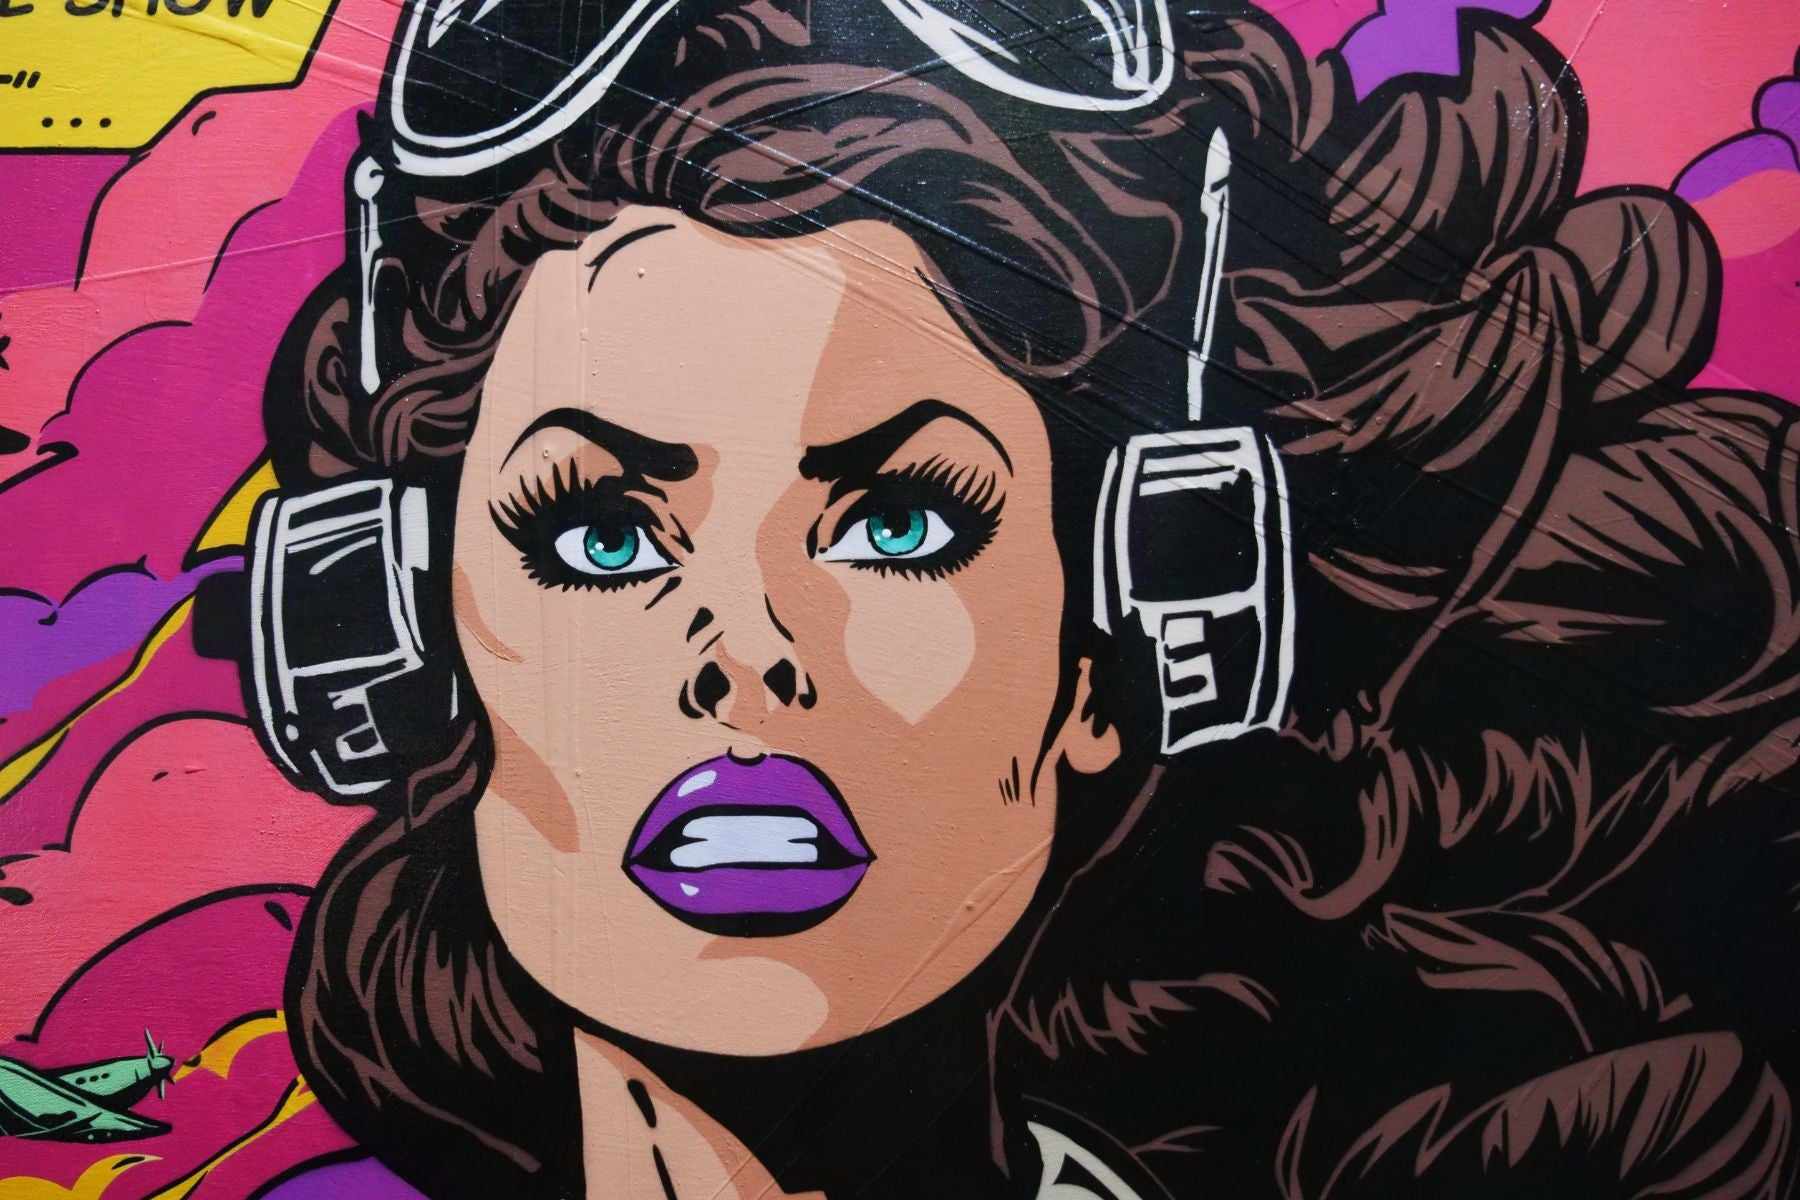 To The Plane 160cm x 100cm Comic Woman Textured Urban Pop Art Painting (SOLD)